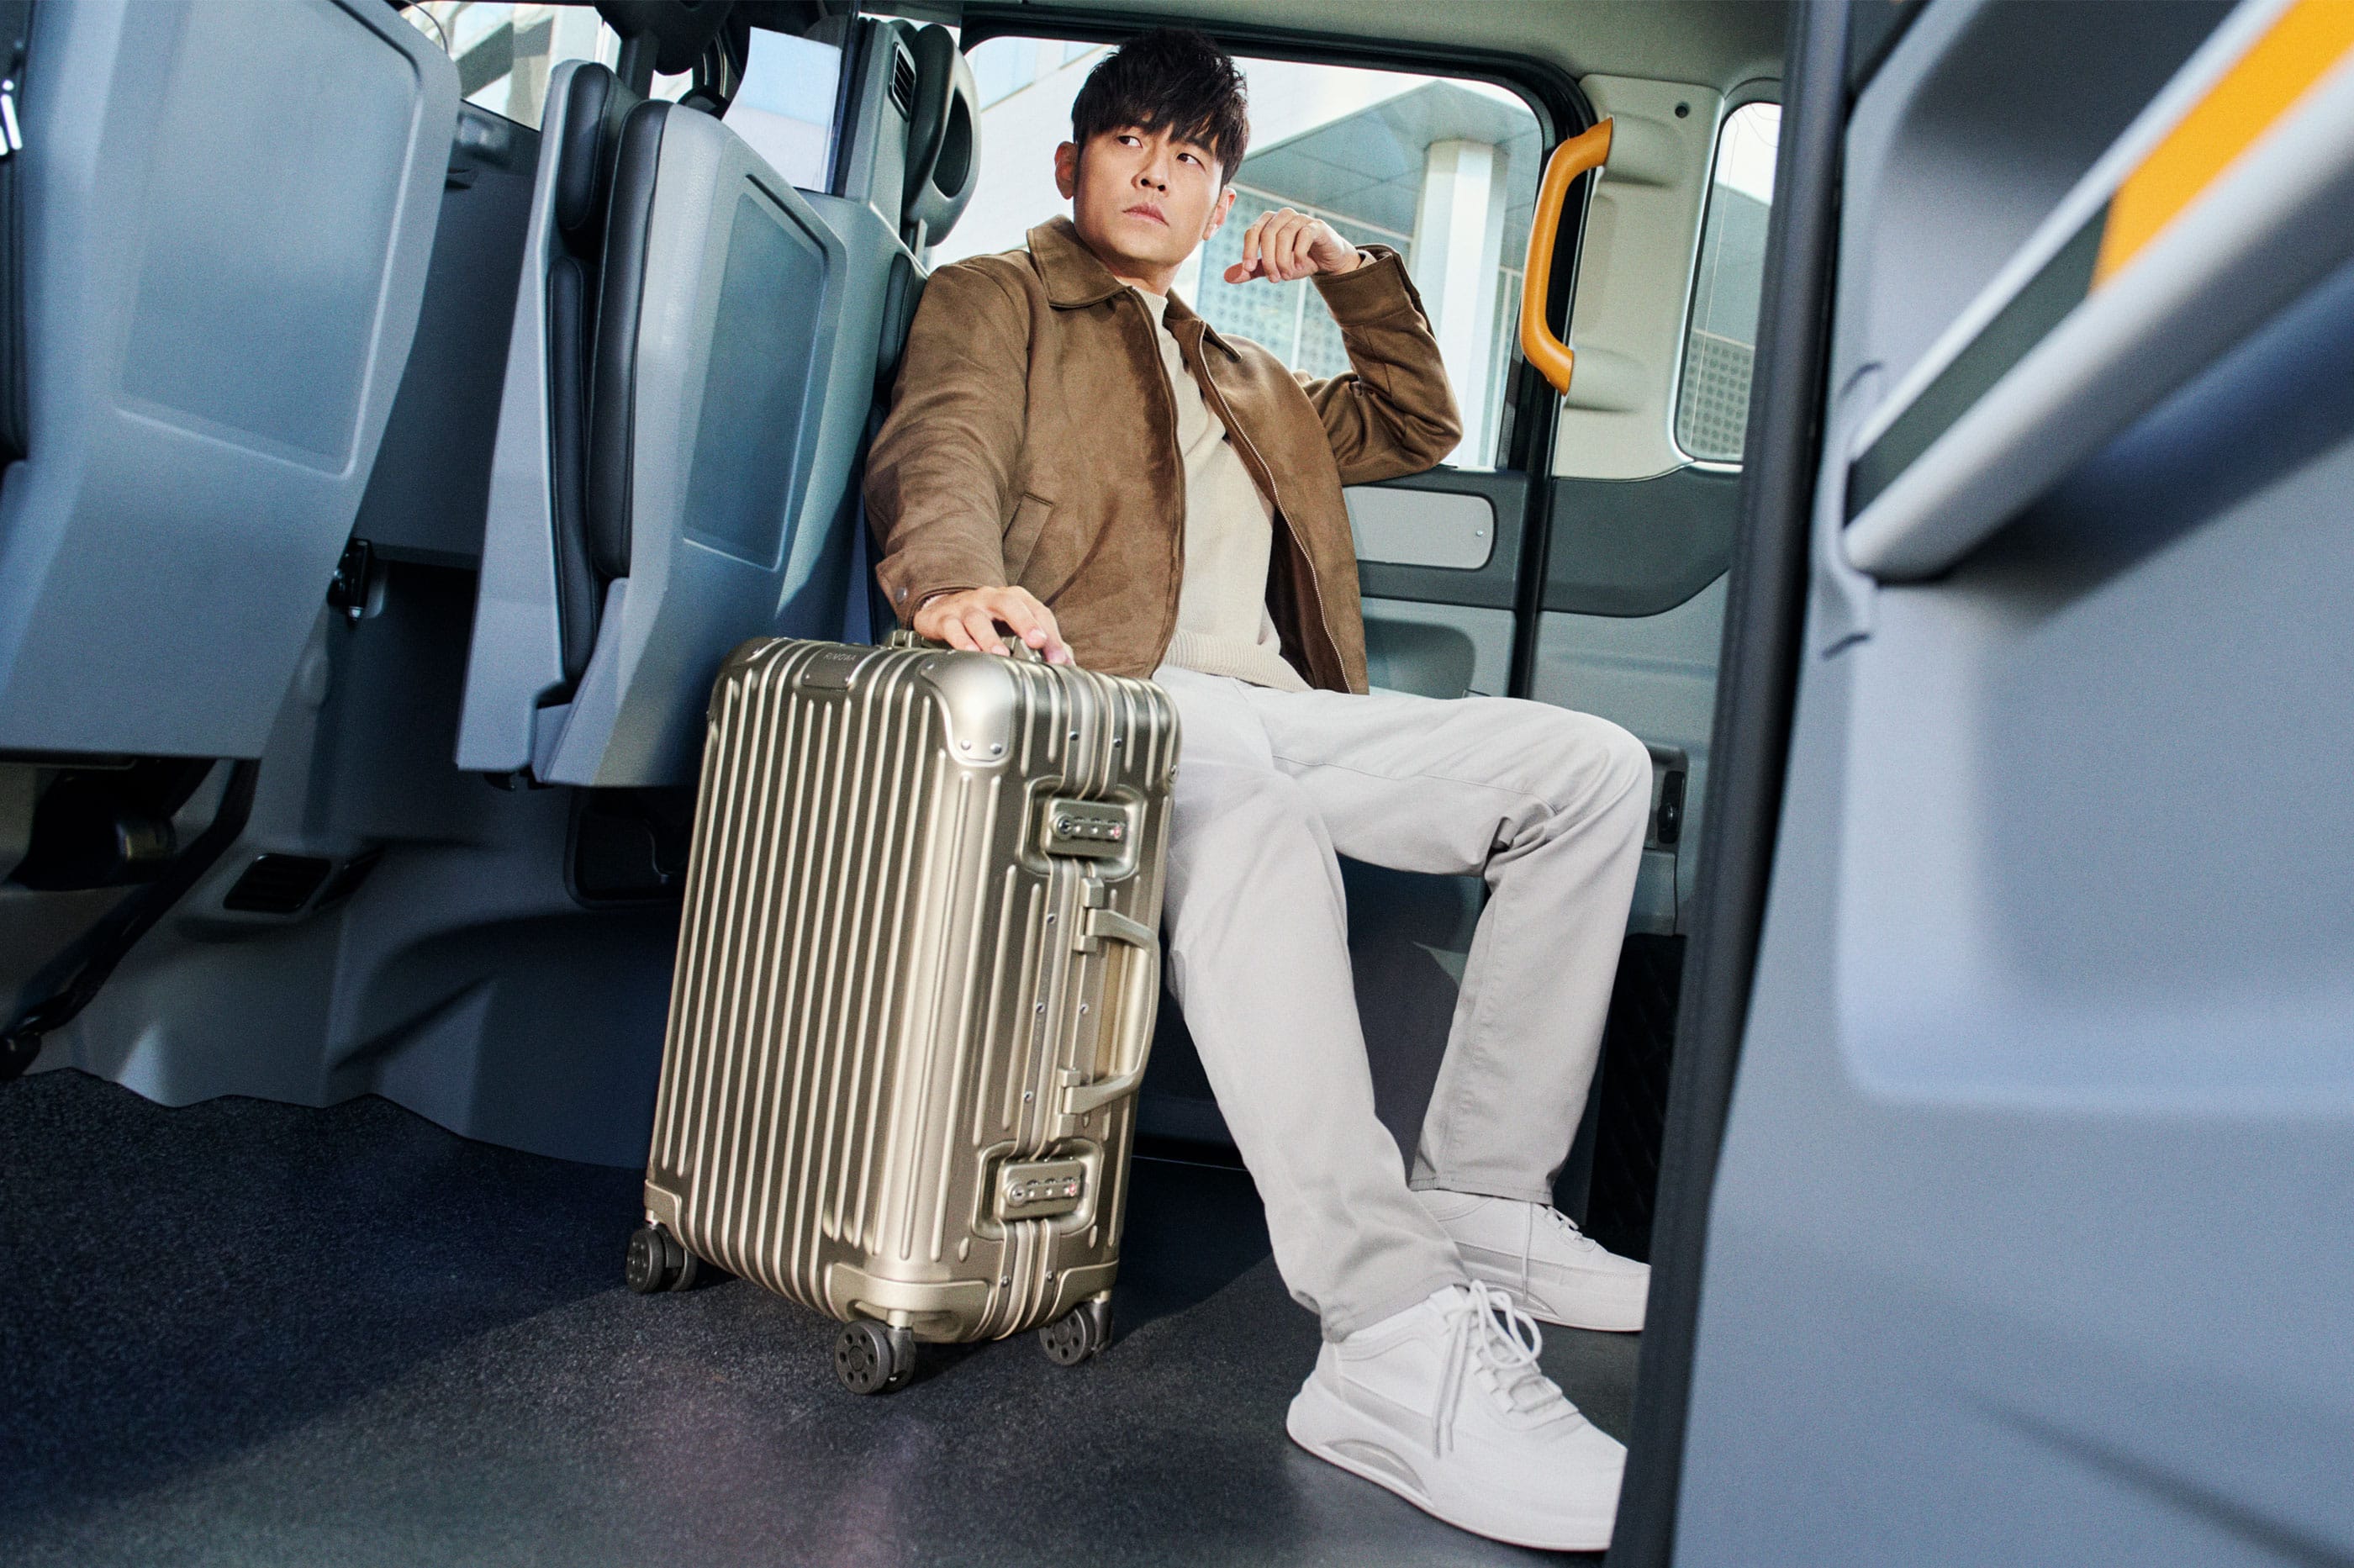 RIMOWA unveils the latest instalment of its 'Never Still' campaign featuring Jay Chou